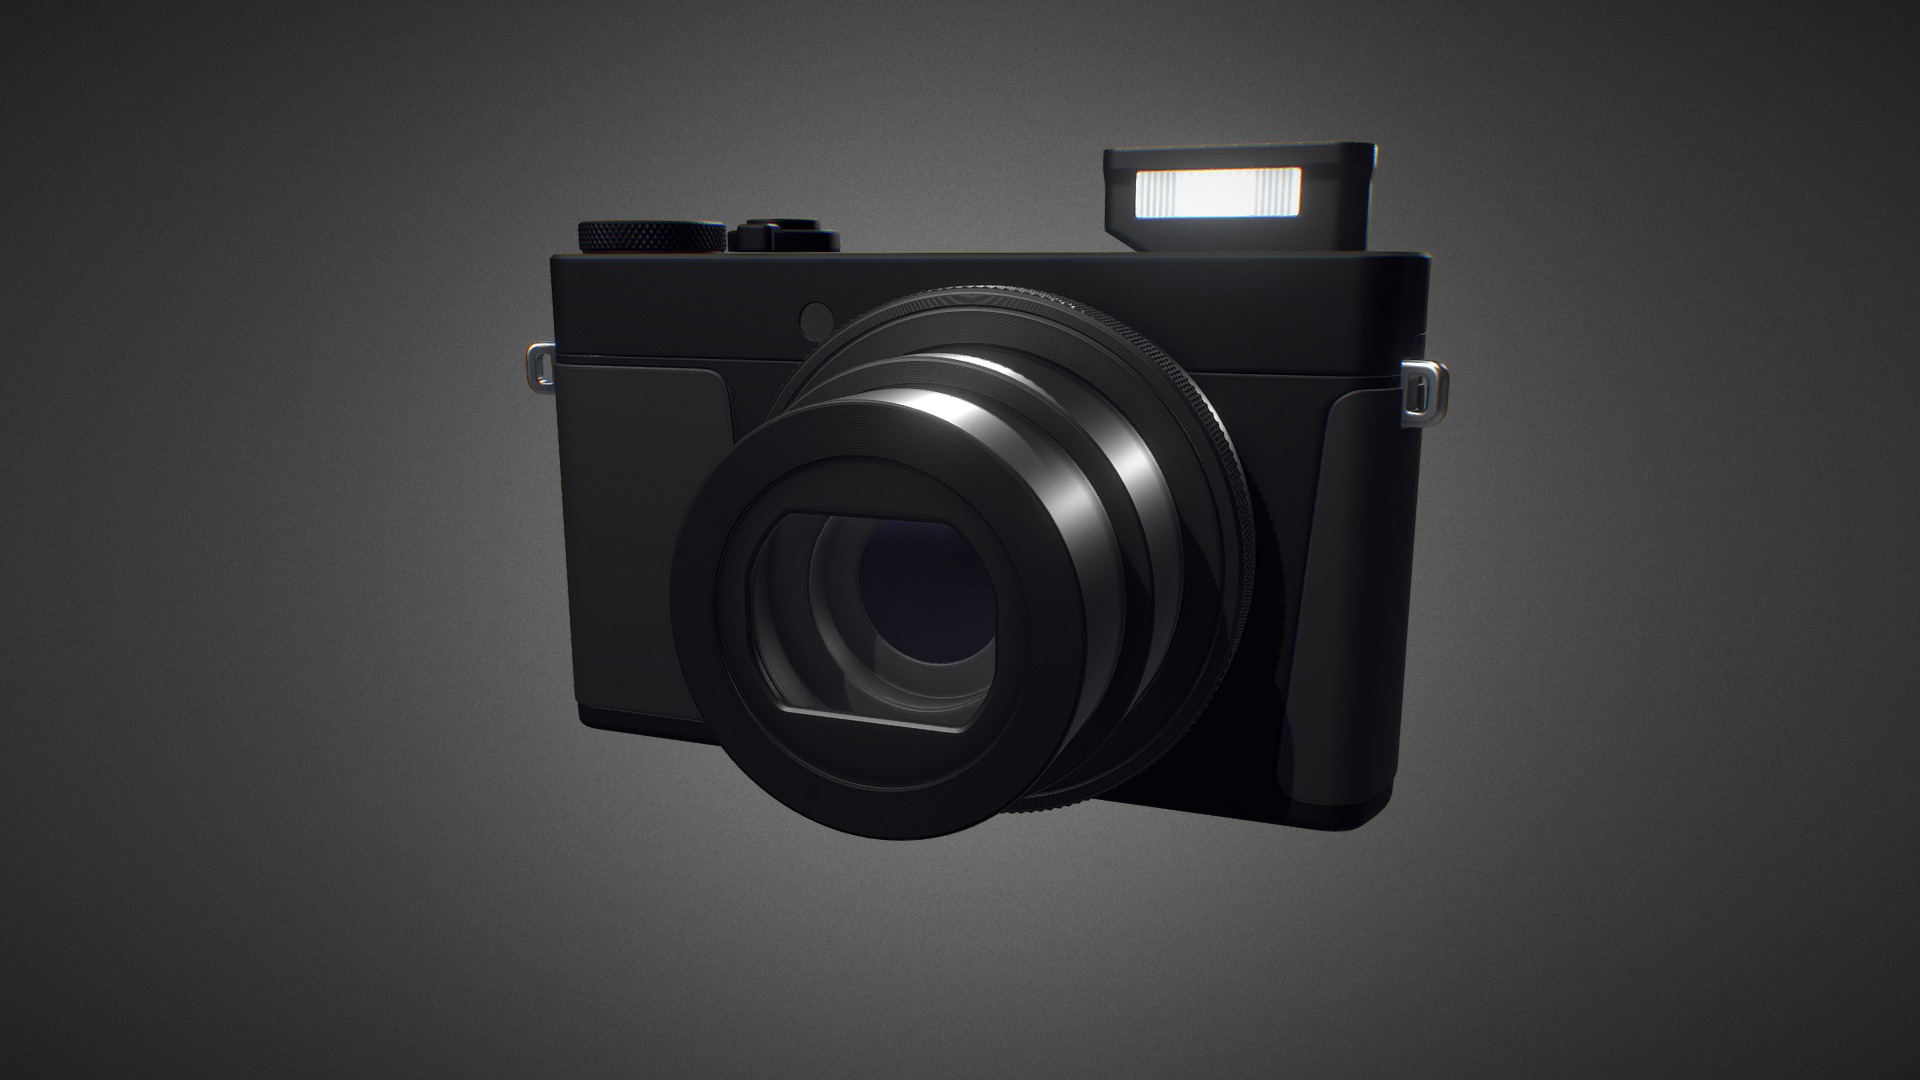 3D model Canon PowerShot G9 X Mark II for Element 3D - This is a 3D model of the Canon PowerShot G9 X Mark II for Element 3D. The 3D model is about a black camera with a lens.